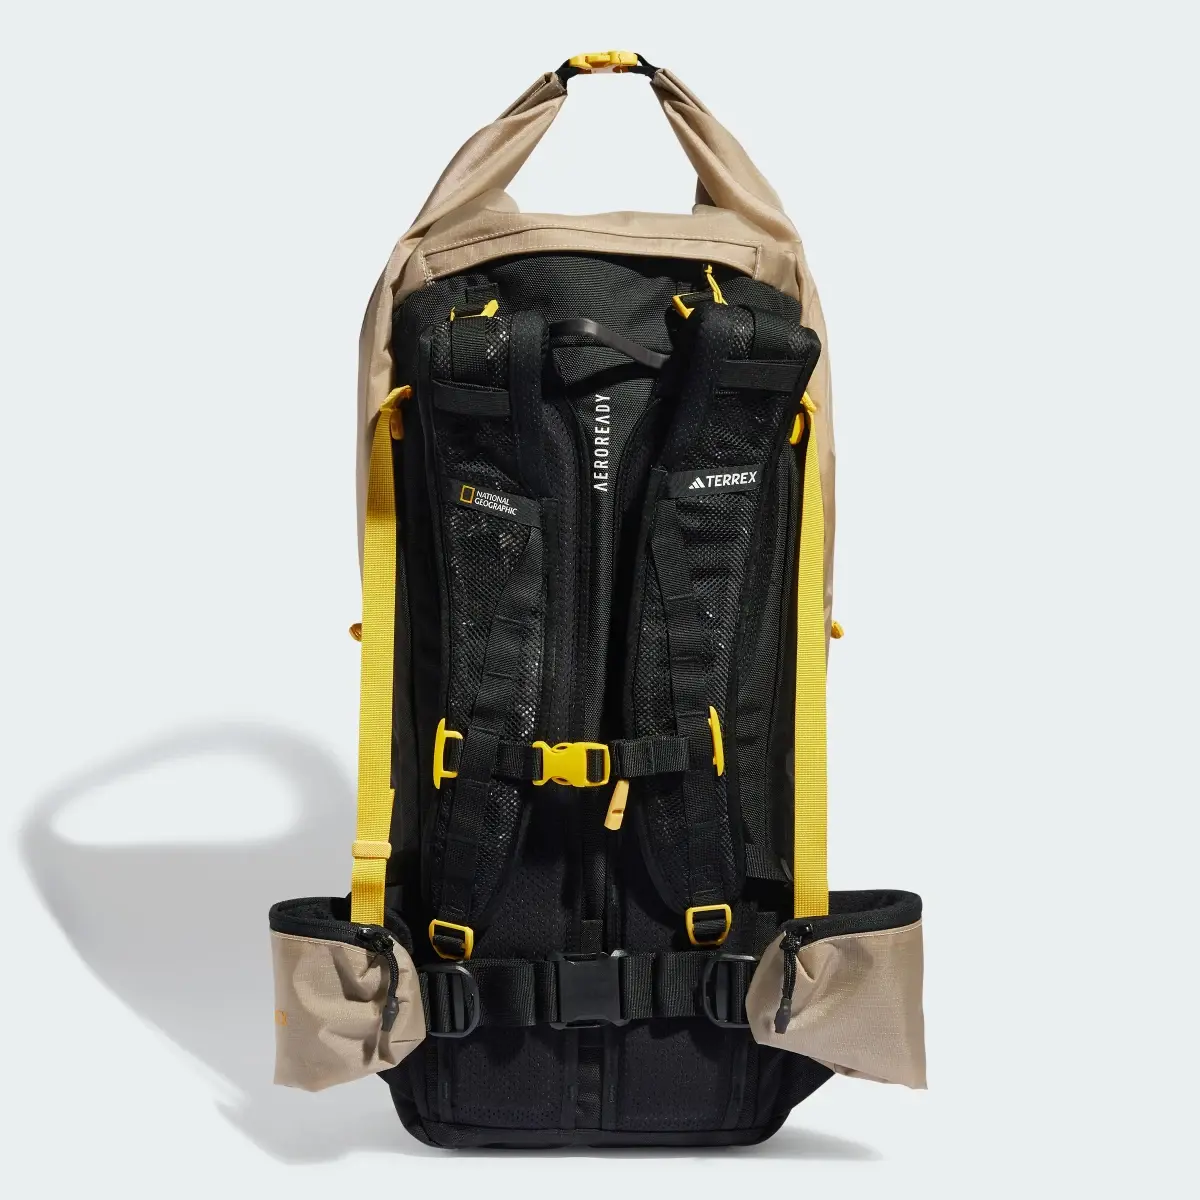 Adidas Terrex x National Geographic Hike Backpack. 3